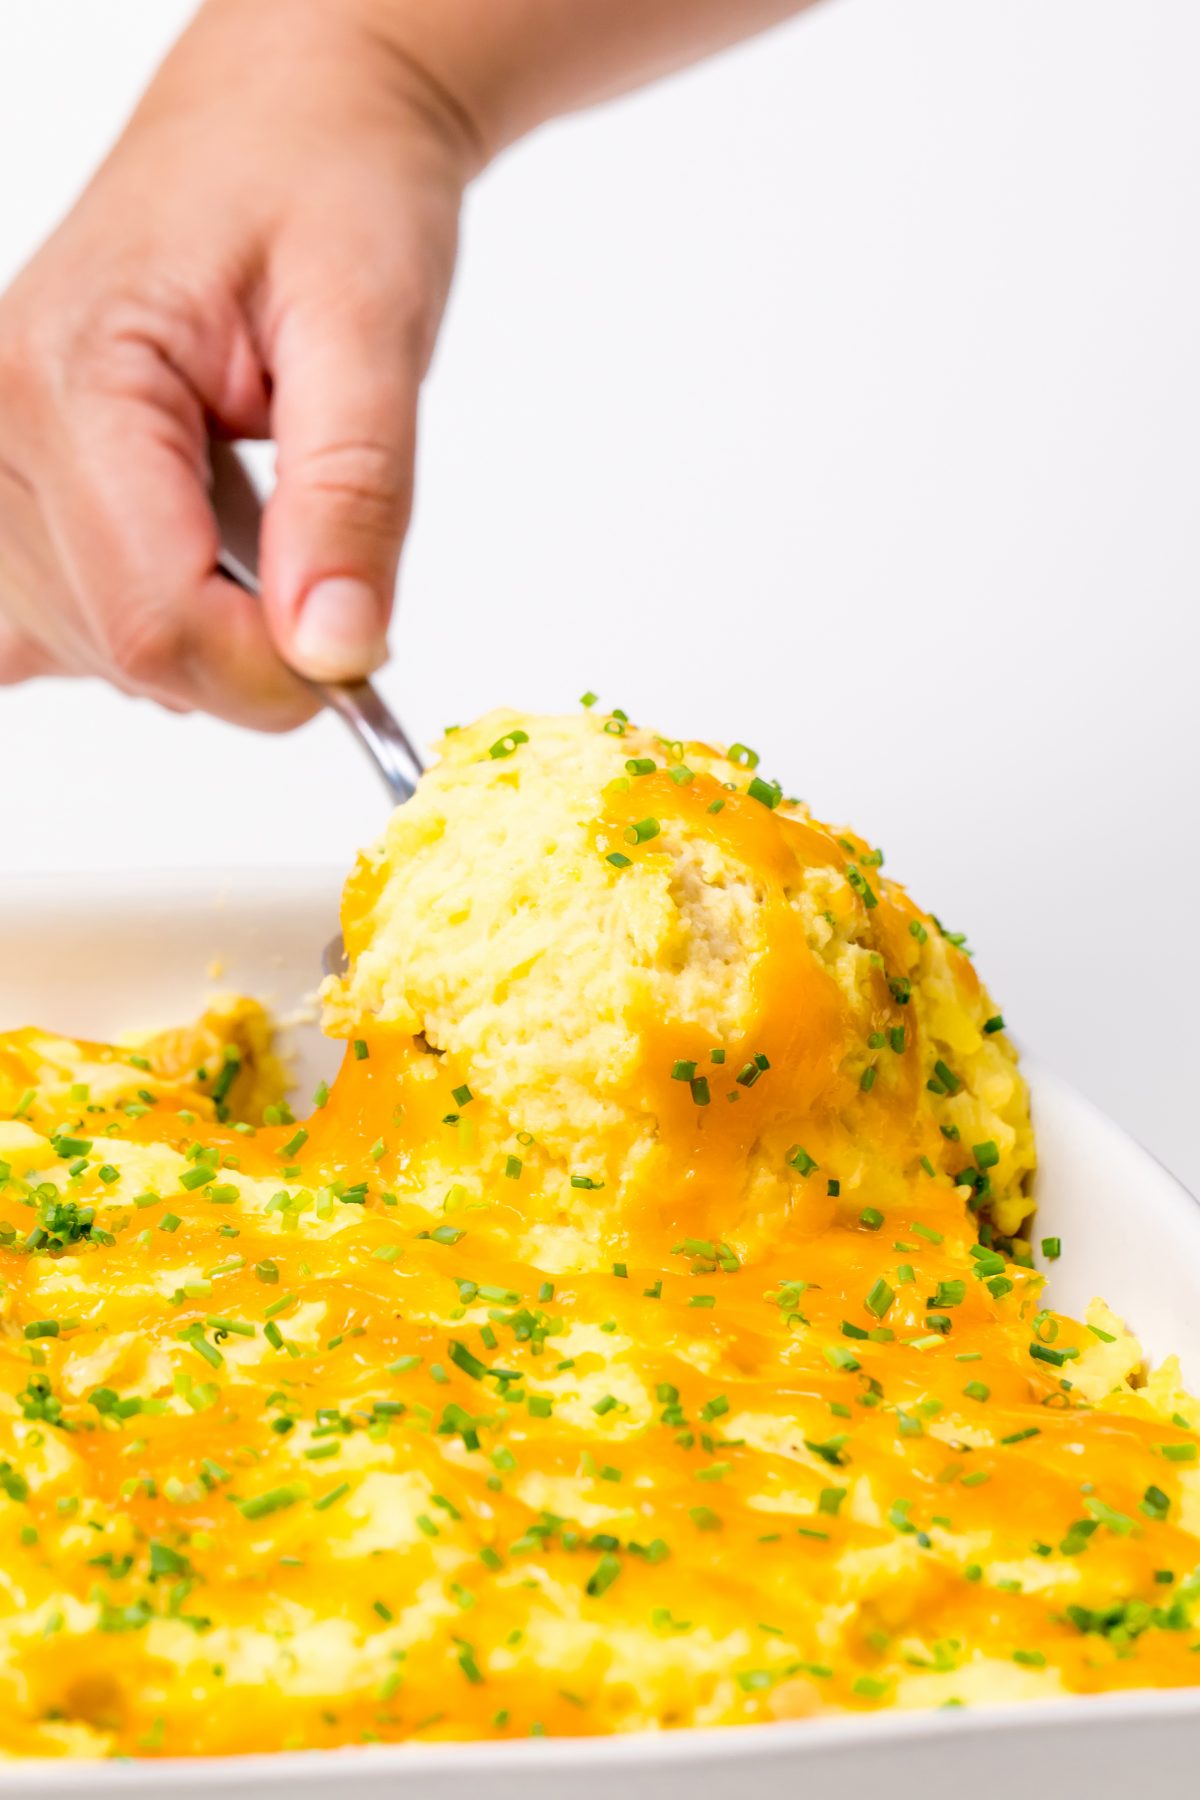 These mashed potatoes will be your new go-to.